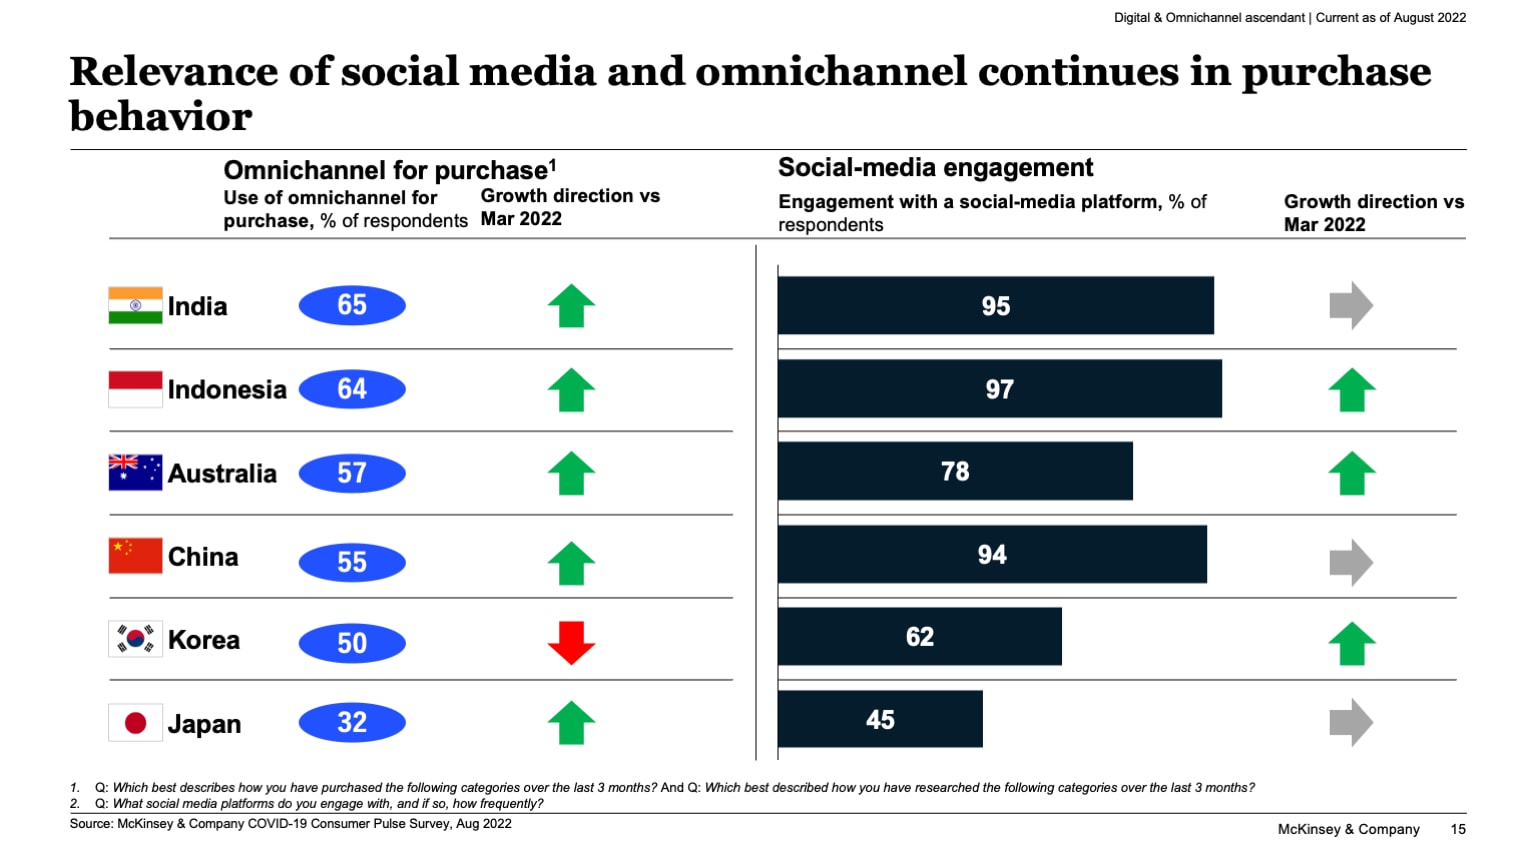 Relevance of social media and omnichannel continues in purchase behavior